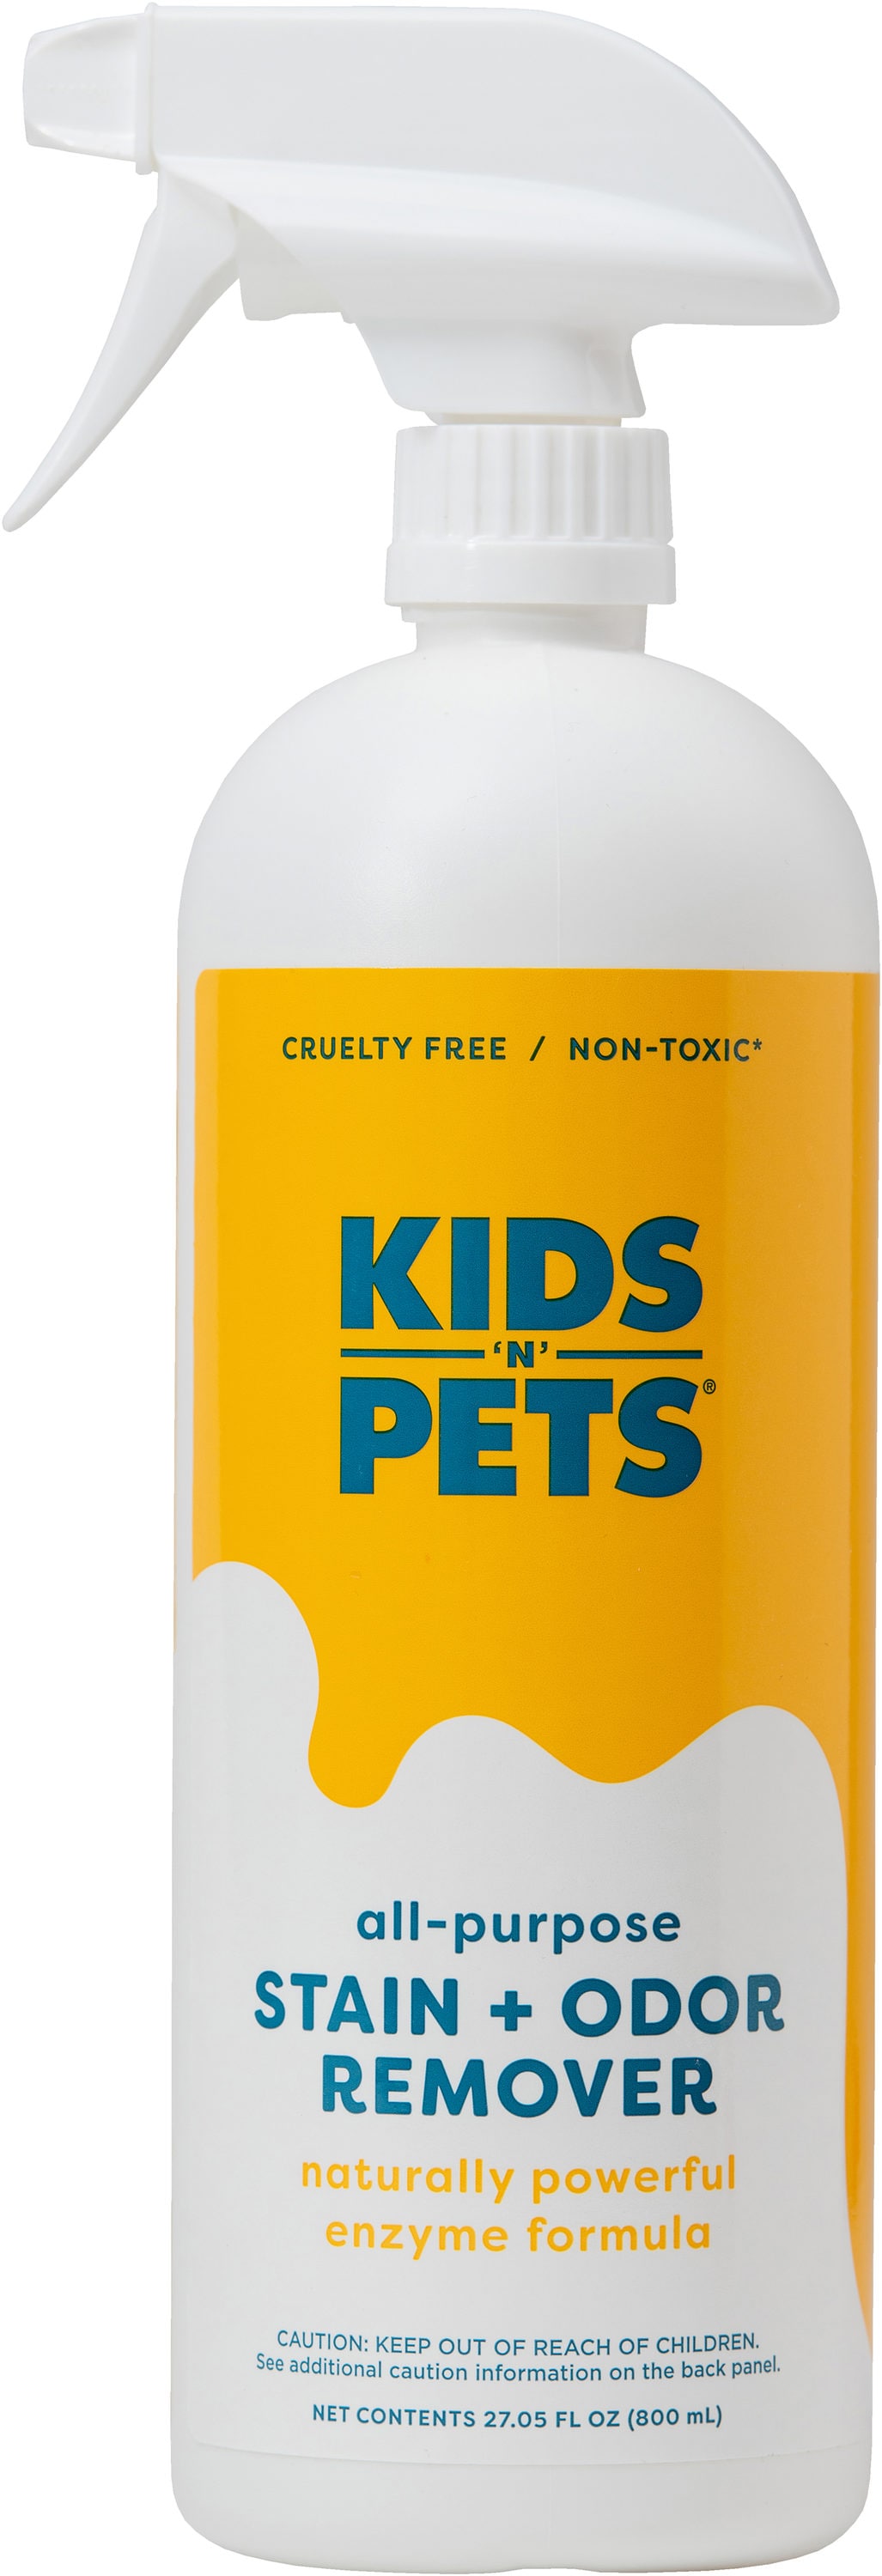 KIDS’N’PETS Spray Stain Remover 1 Fluid Ounce